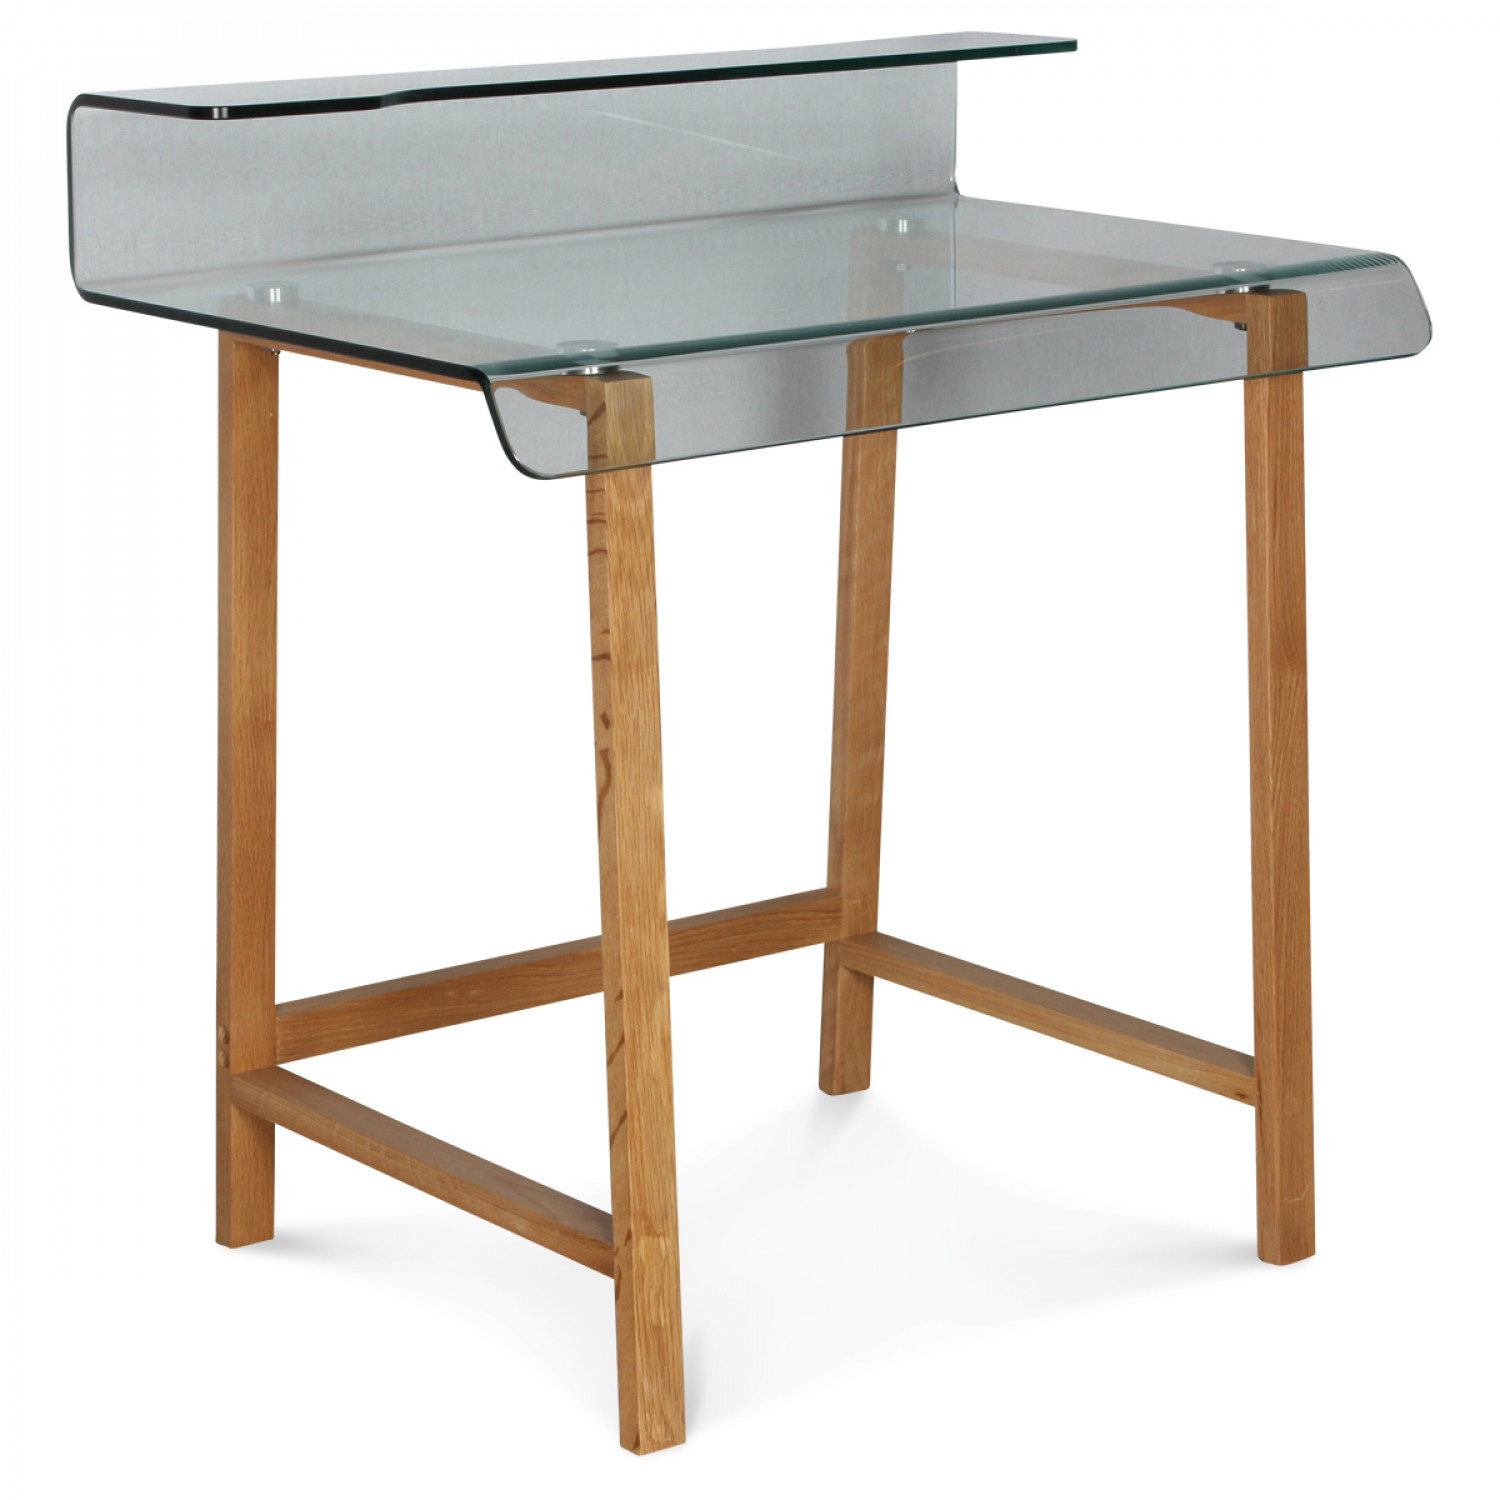 Desk in glass and wood - Dimensions: W 85 x D 56 x H 90 cm-Price : 159,00€